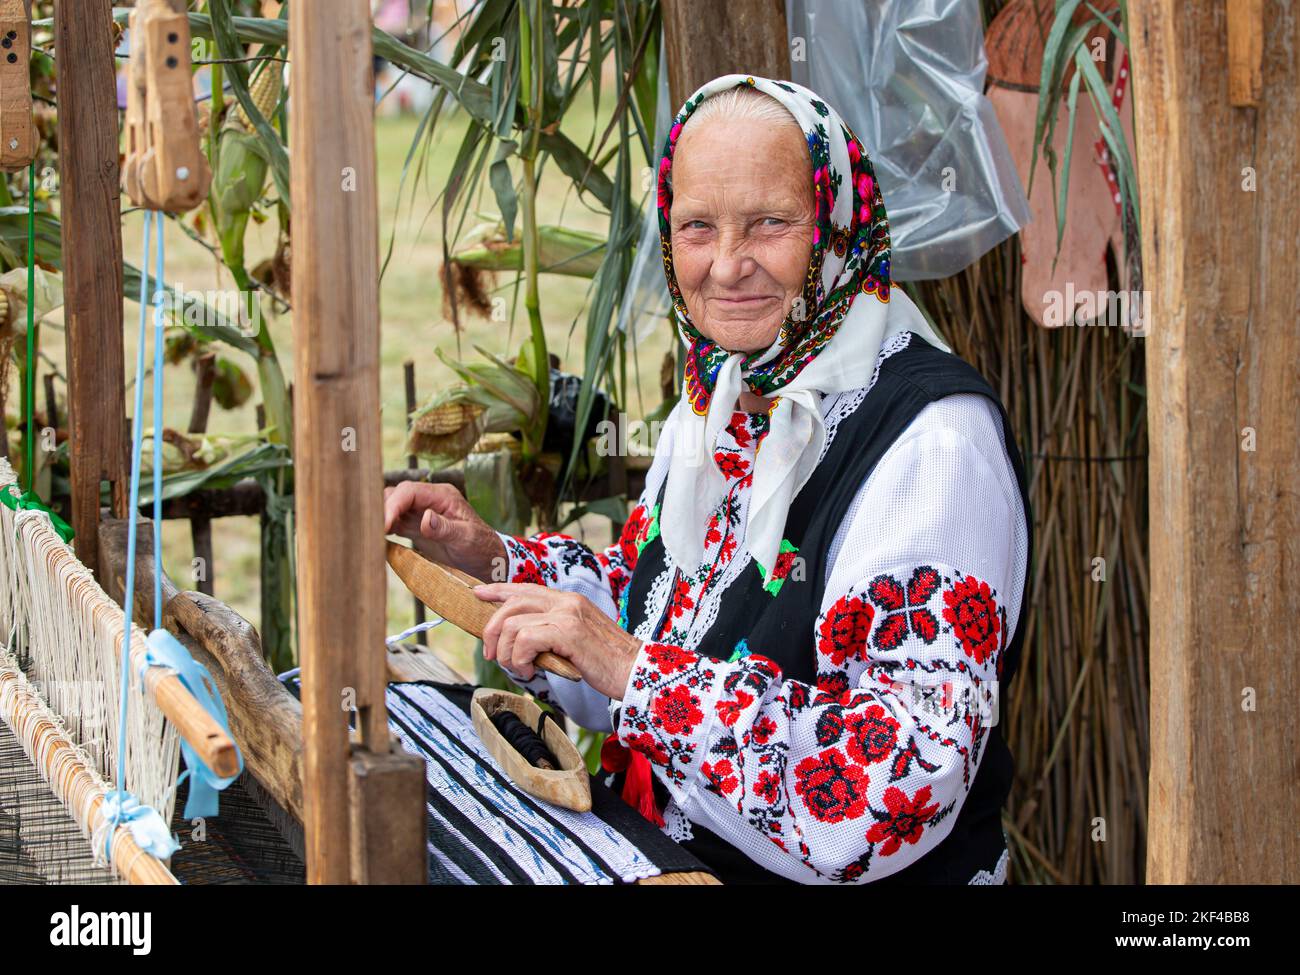 An old Belarusian or Ukrainian woman in an embroidered shirt at a vintage loom. Slavic elderly woman in national ethnic clothes. Stock Photo